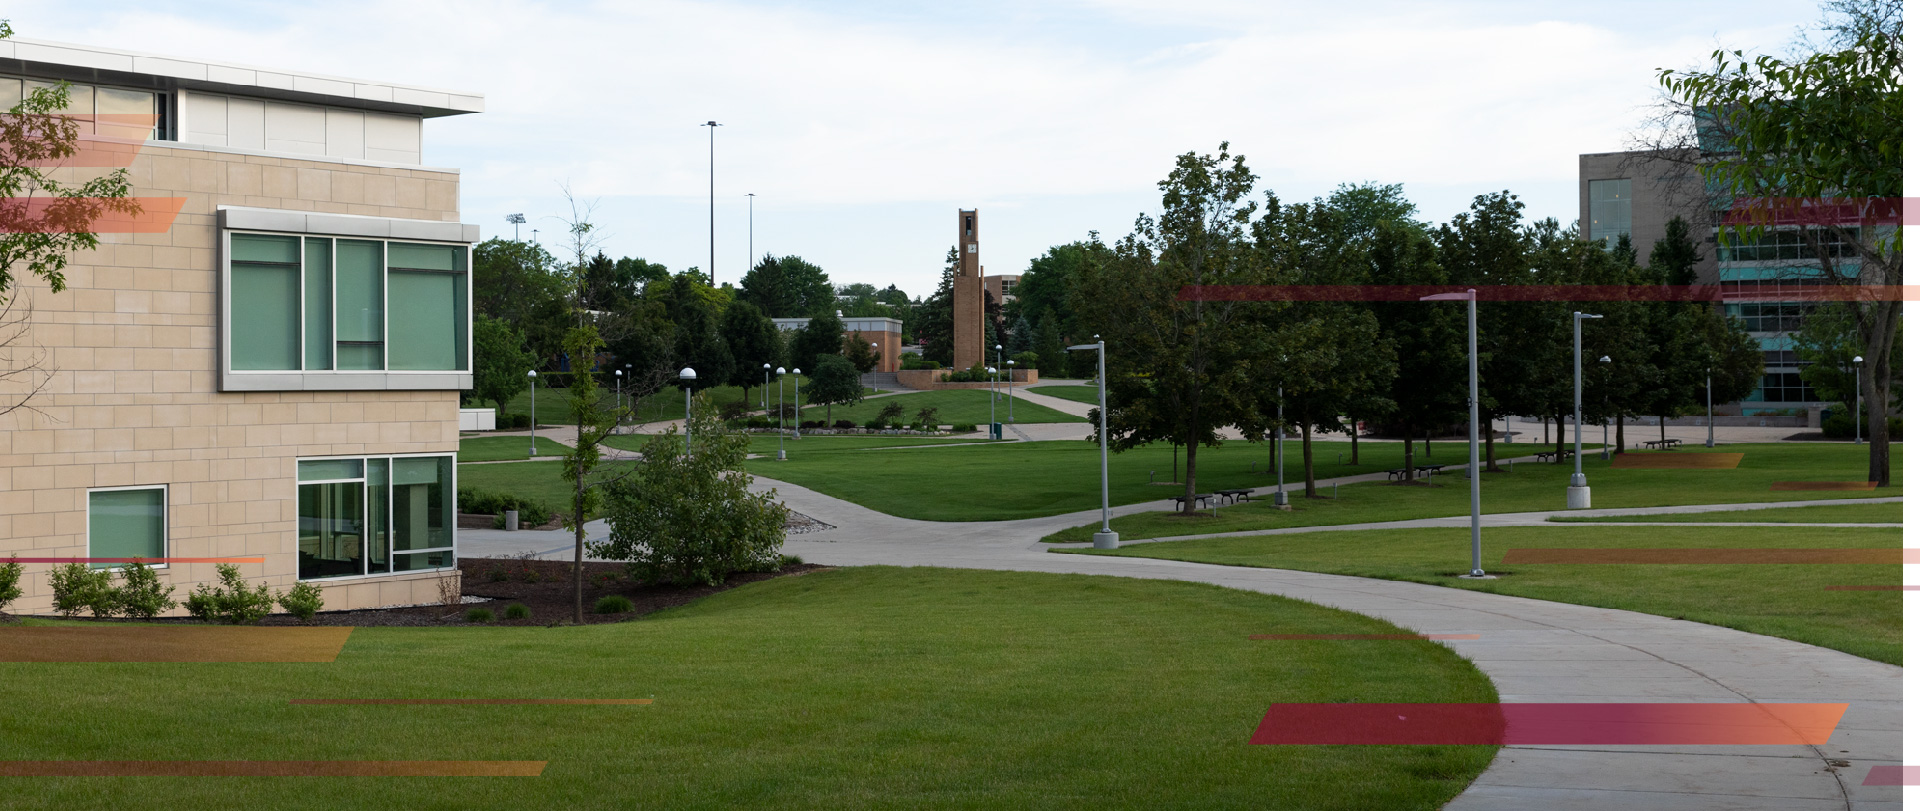 View of the quad on the campus of Ferris State University